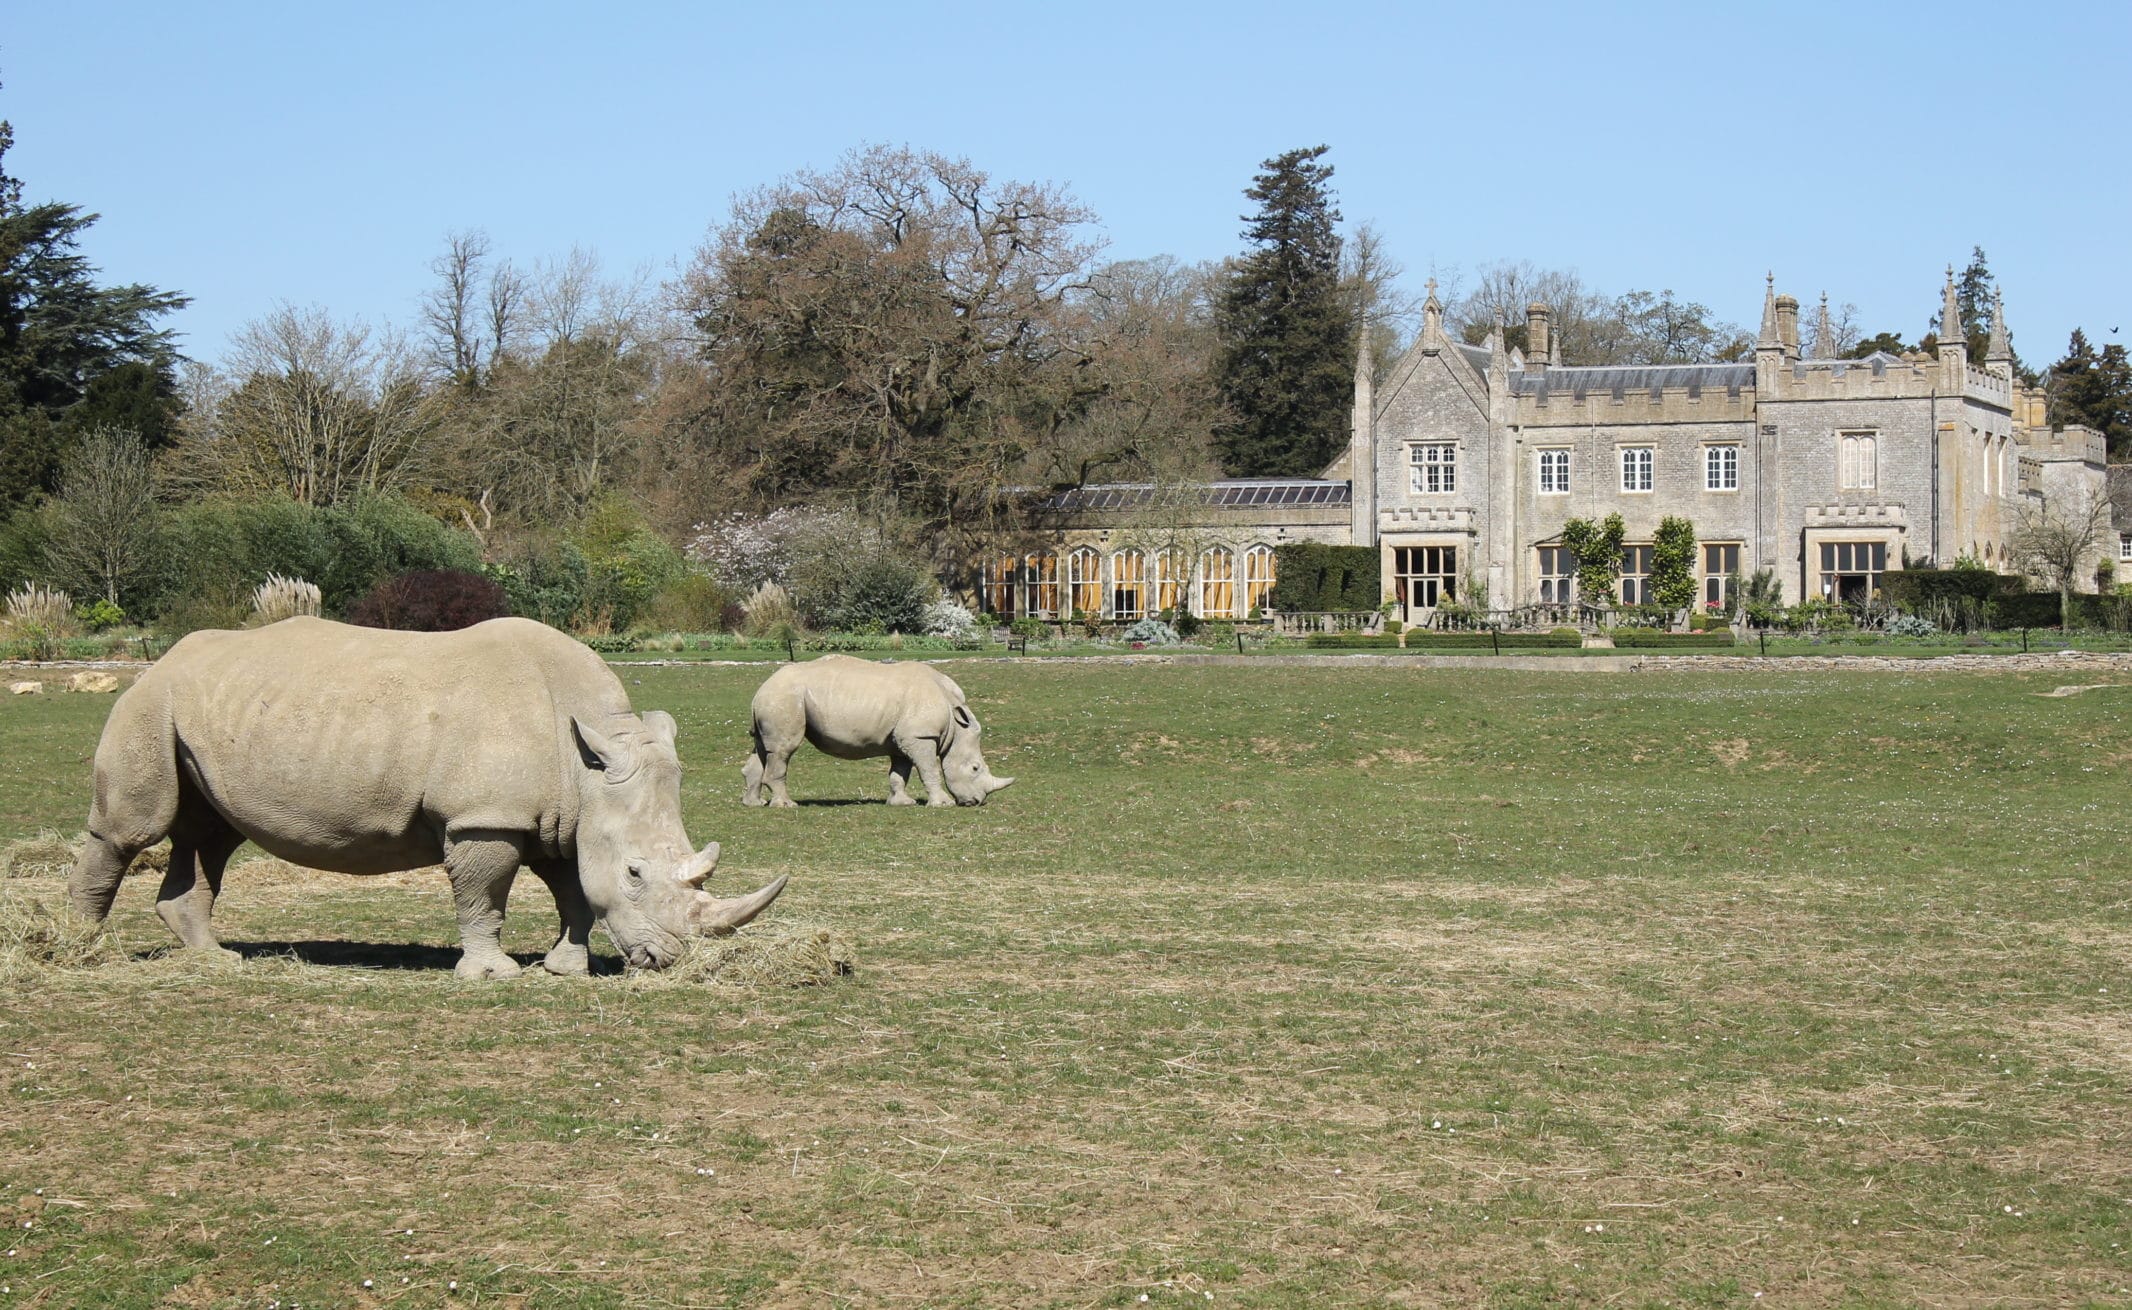 The popular Cotswold Wildlife Park is only a 30 minutes drive from Ellenborough Park.